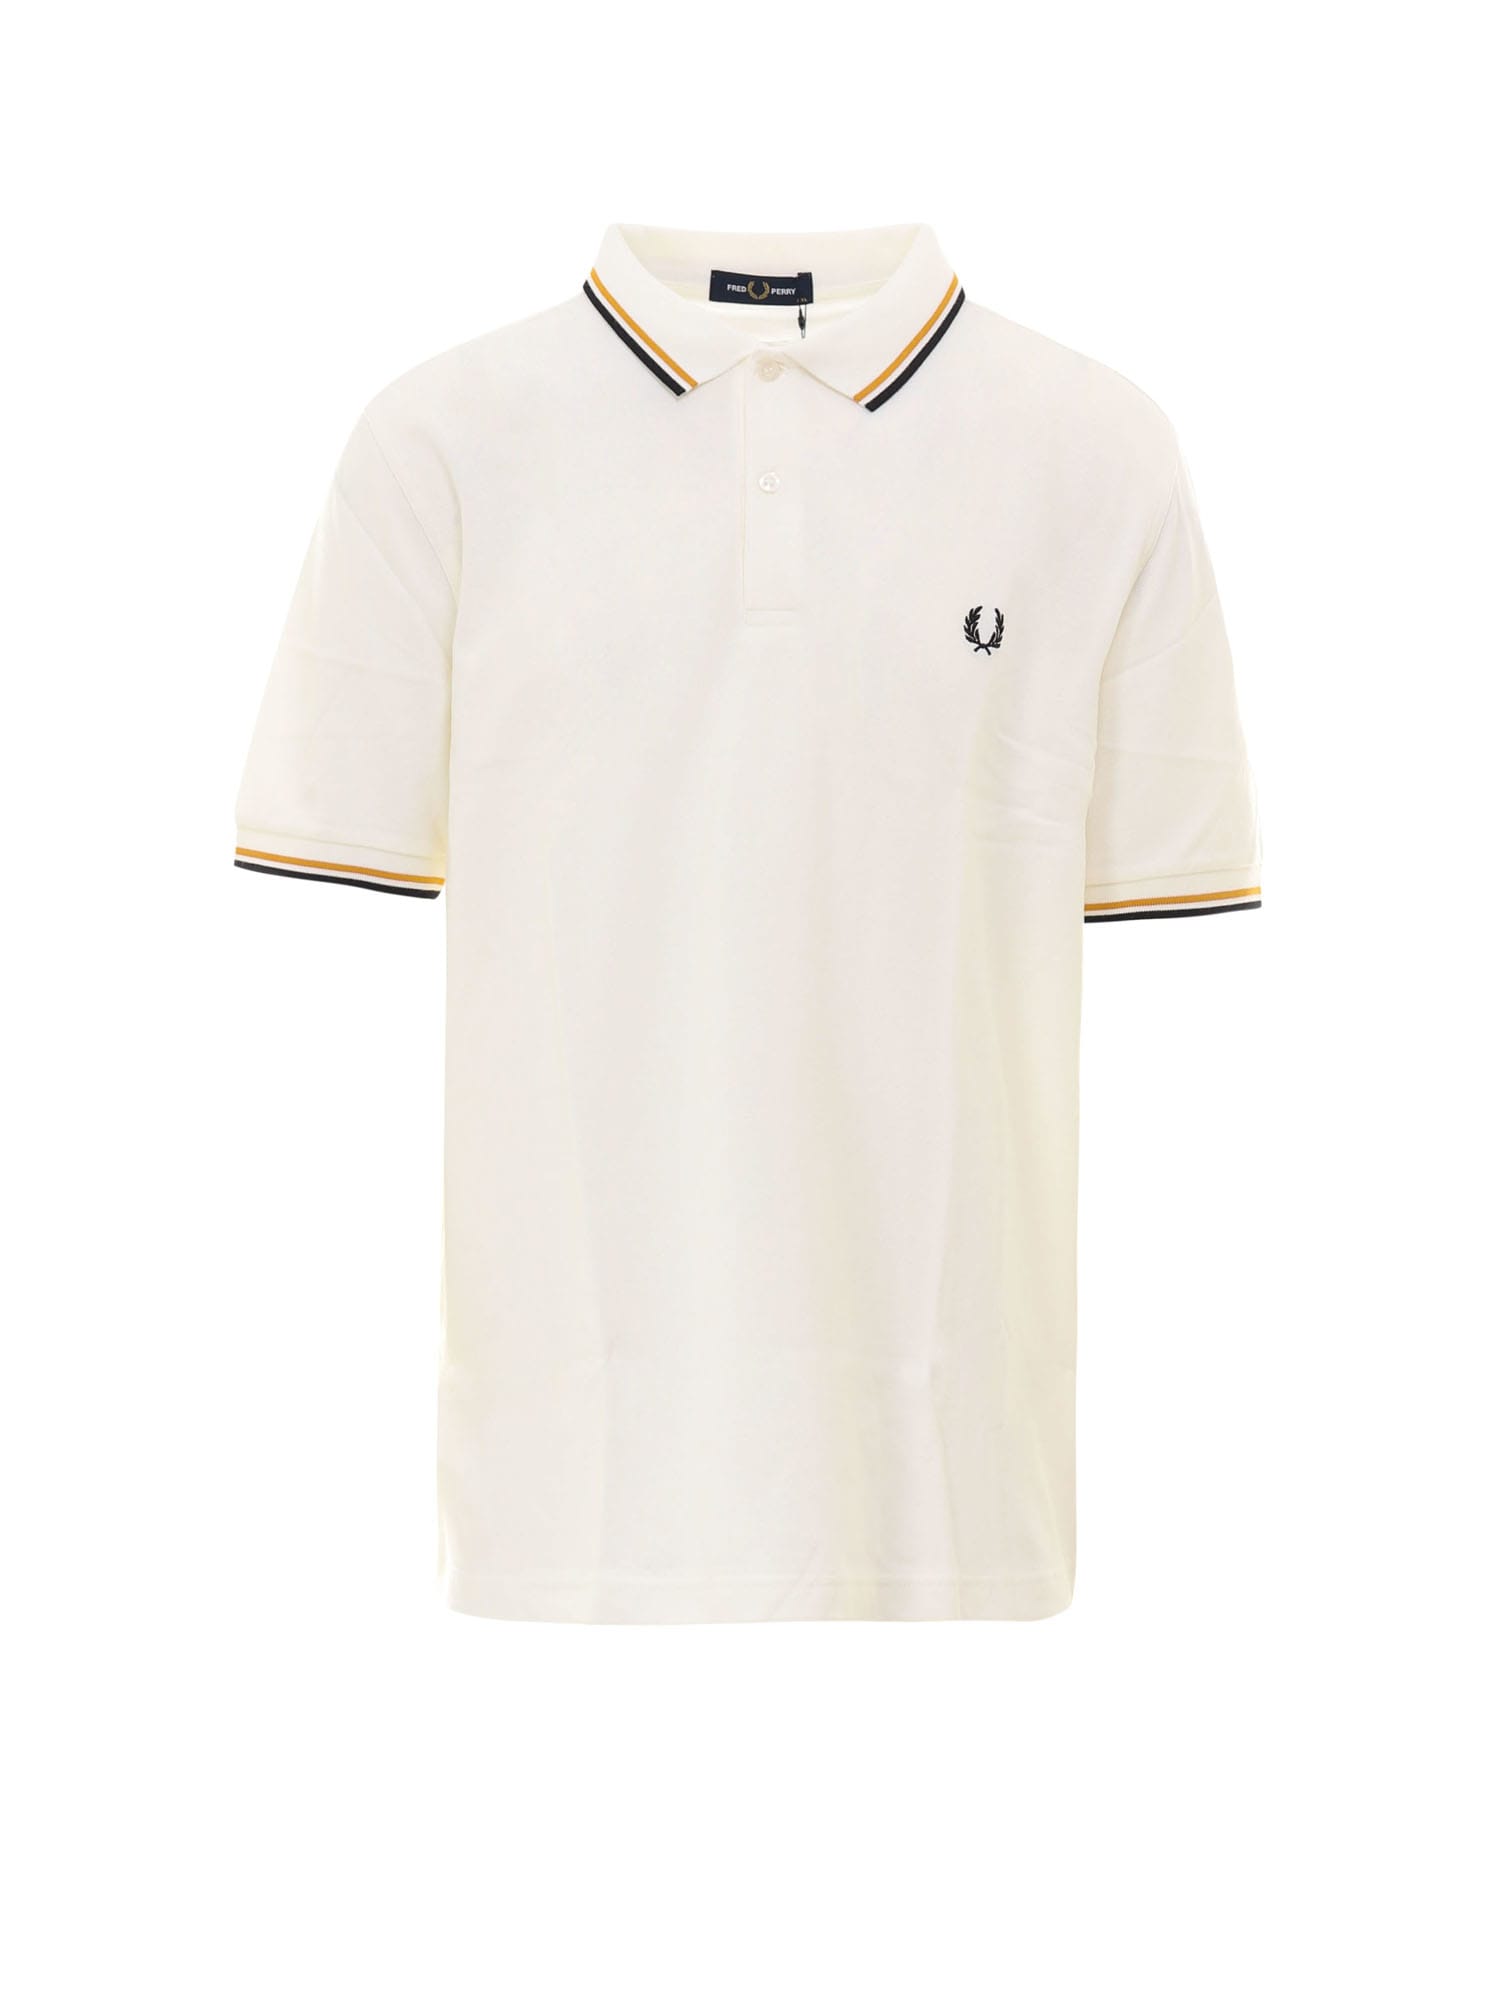 FRED PERRY POLO SHIRT,11843929